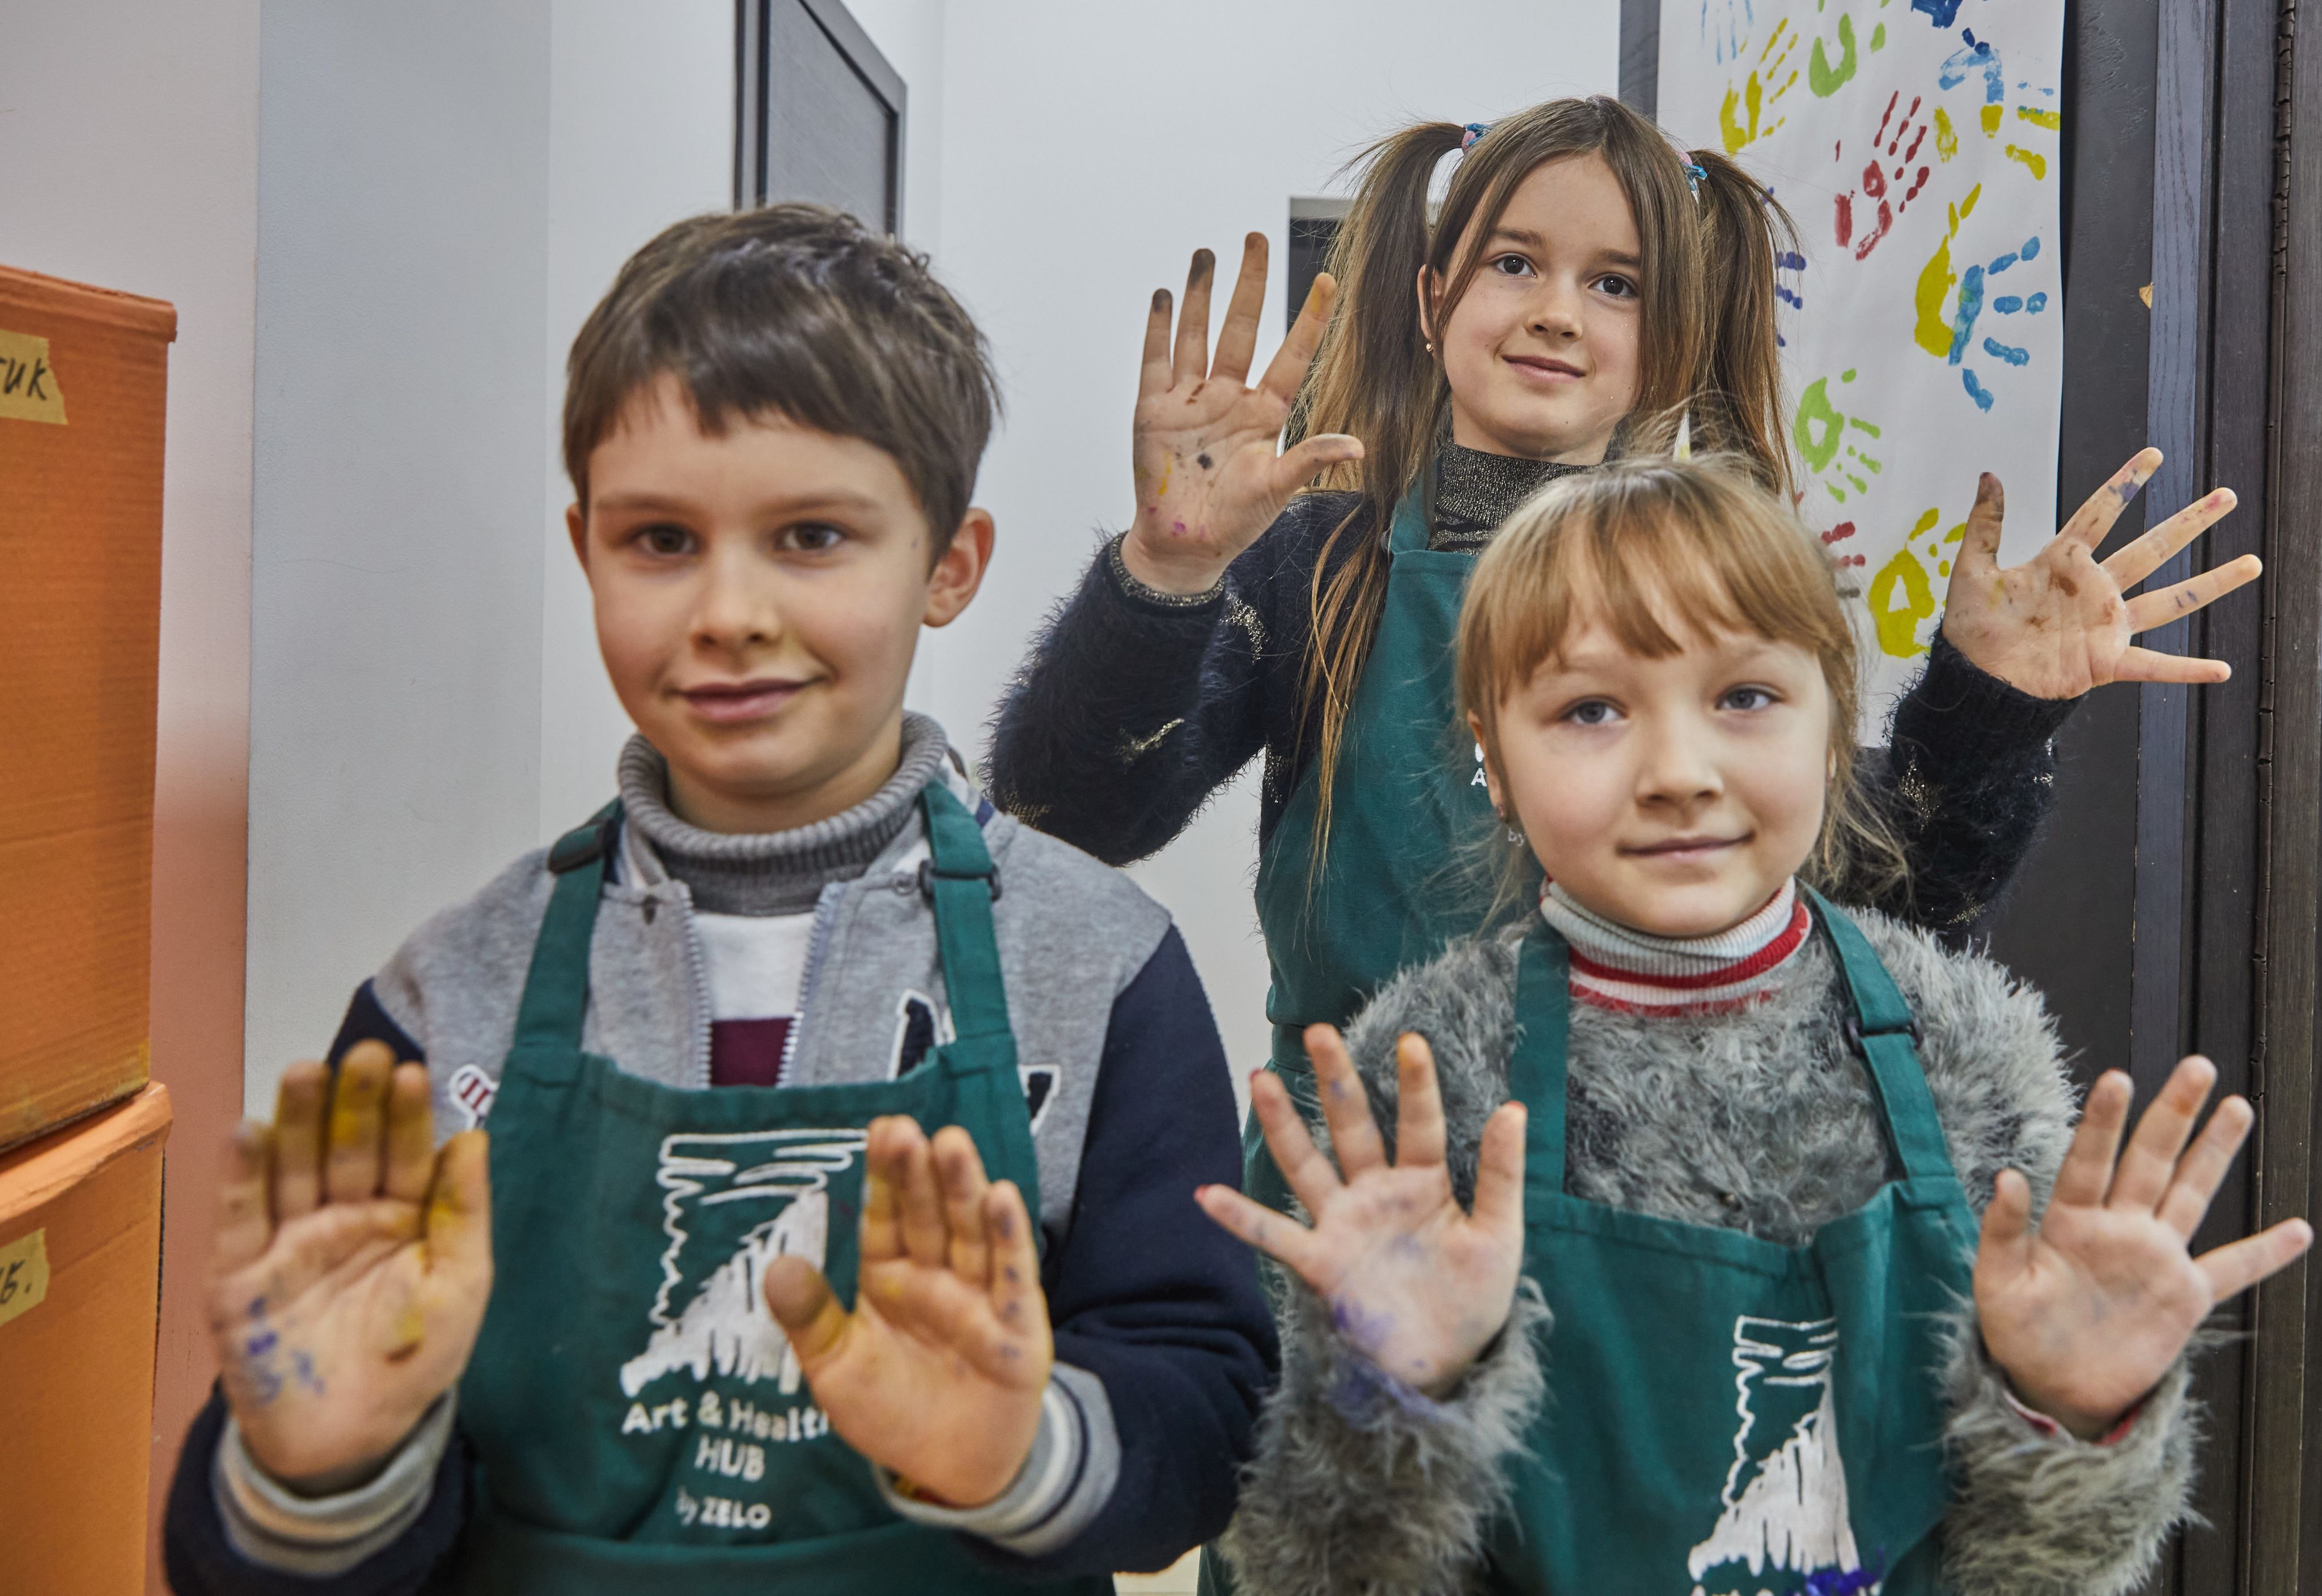 Ihor*, 7, Valentyna*, 9, and Olha*, 7, showing their hands covered in paint after an art therapy workshop in Poltava, Ukraine